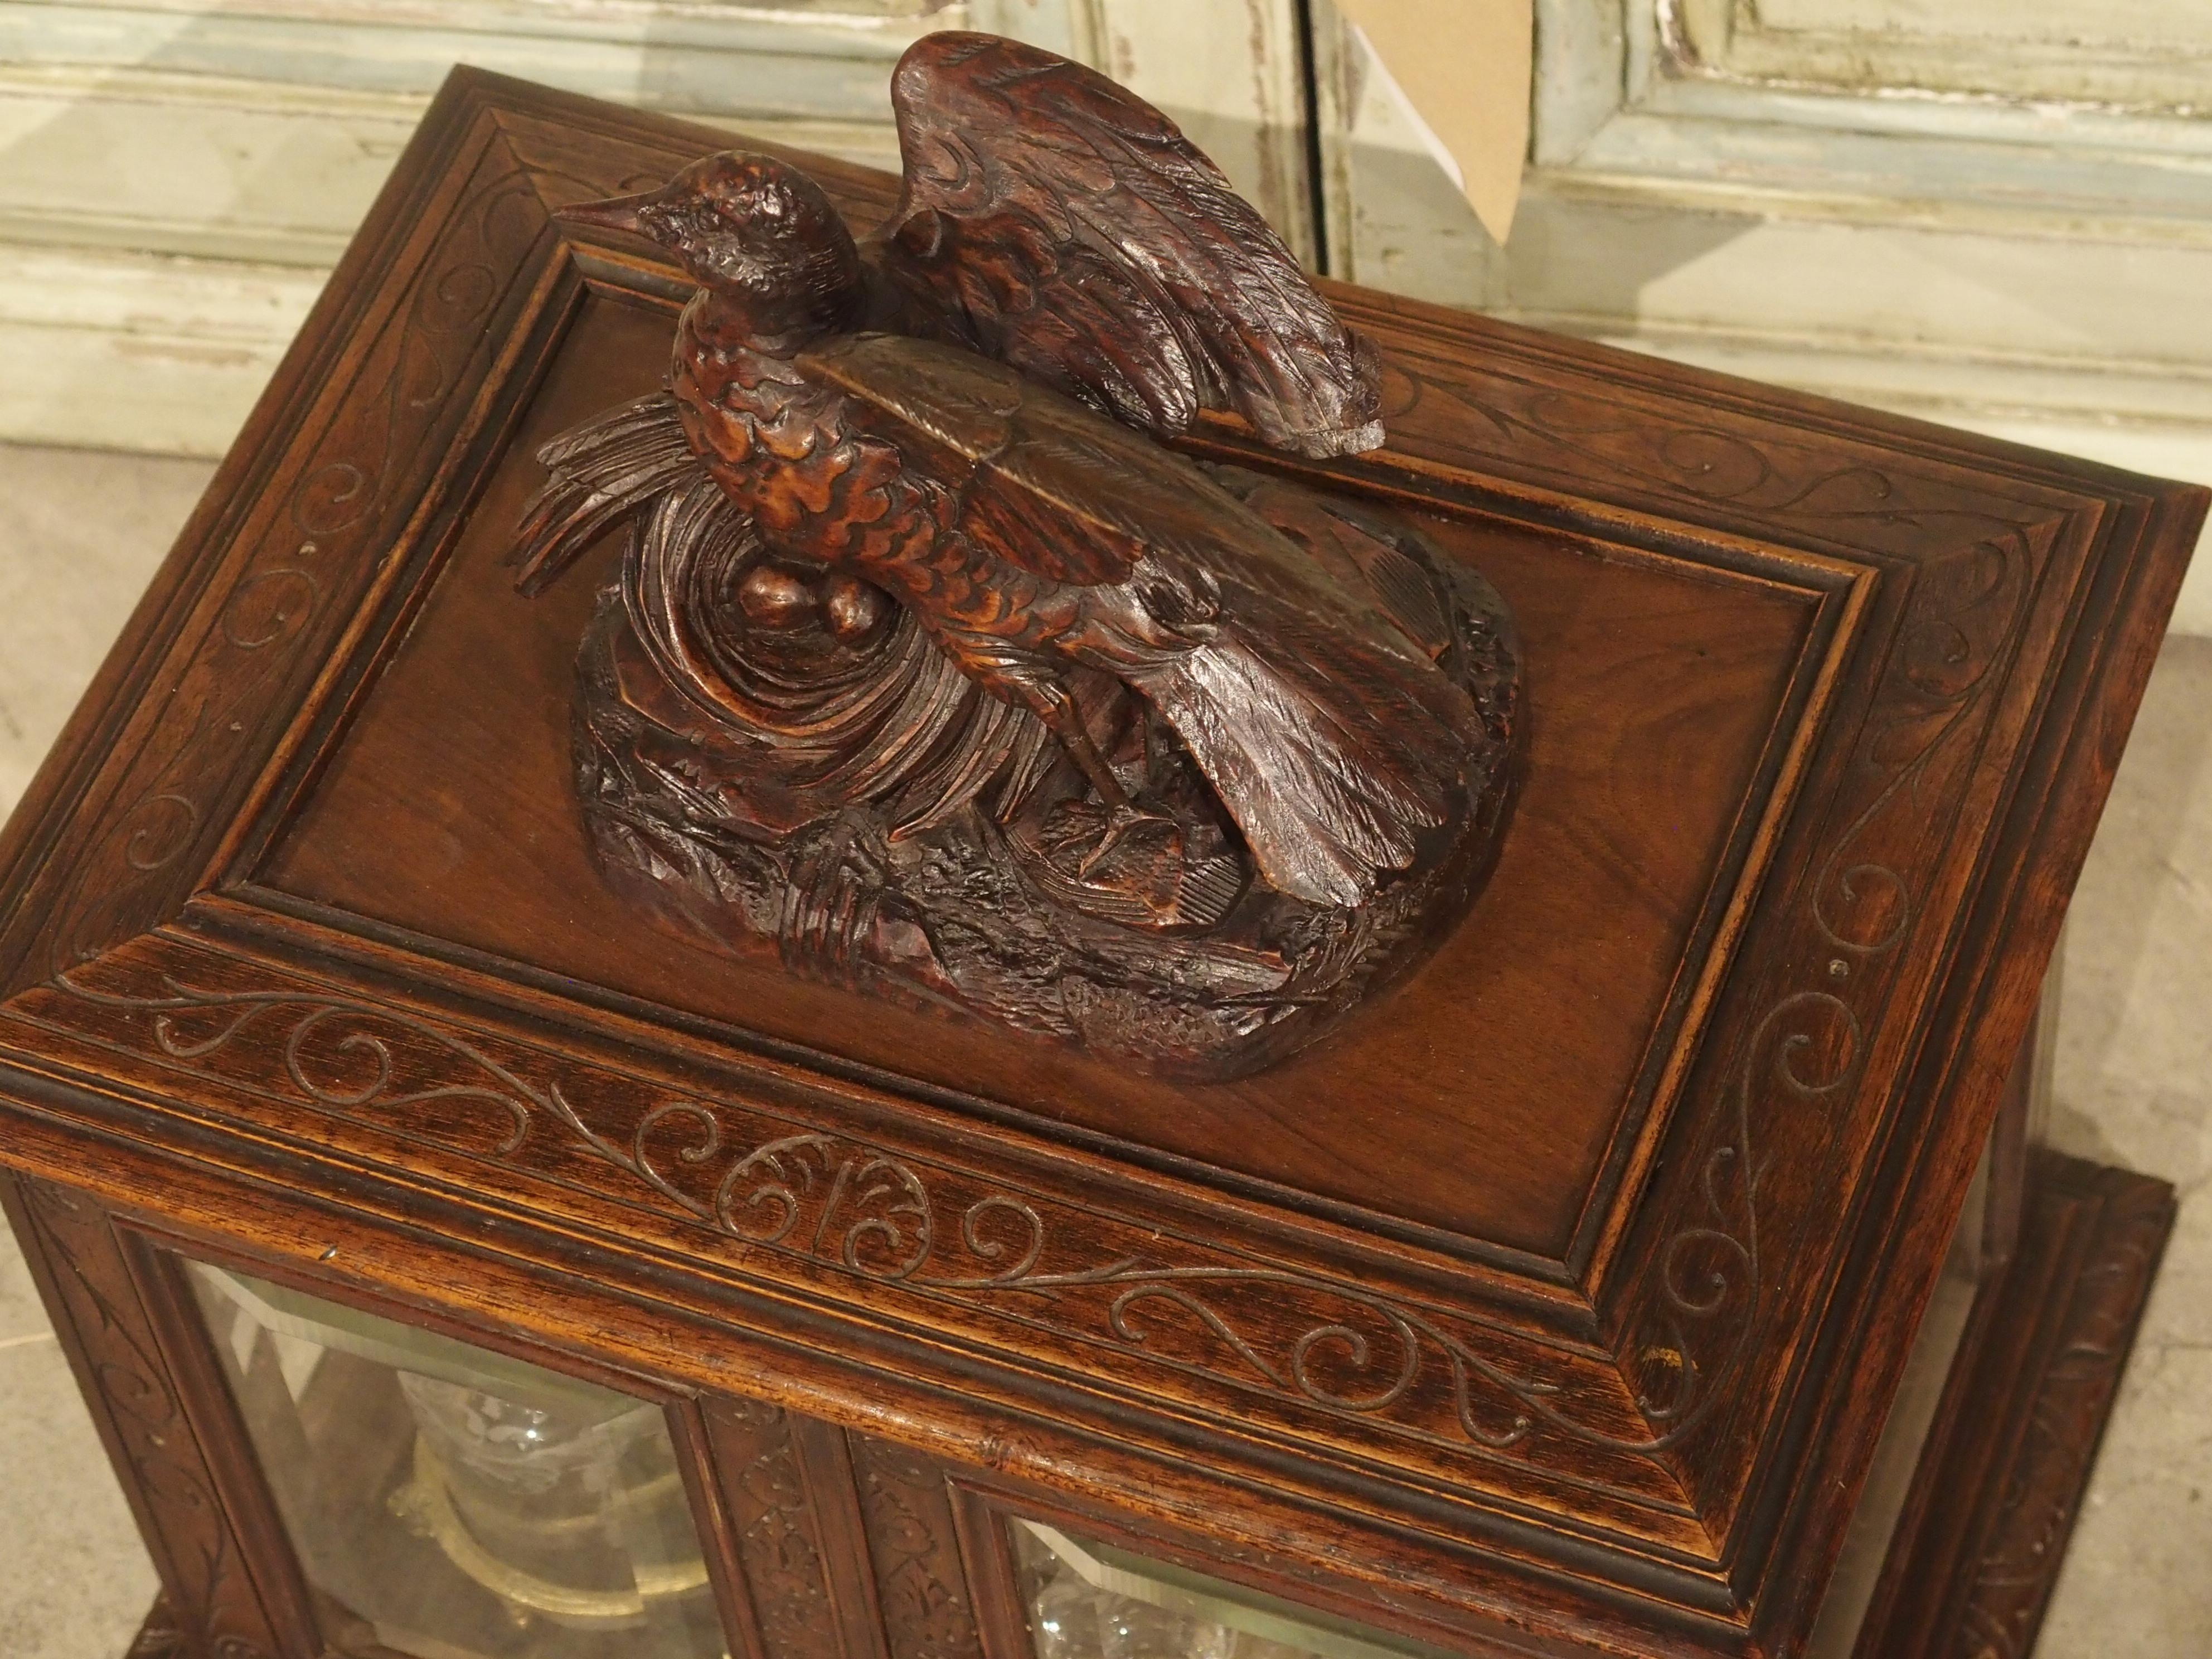 This large Black Forest walnut cave a liqueur is from 19th century France. The box has a working lock and key and the interior contents are visible through the beveled glass sides. In the 1800s, black forest carvings became a symbol of status and